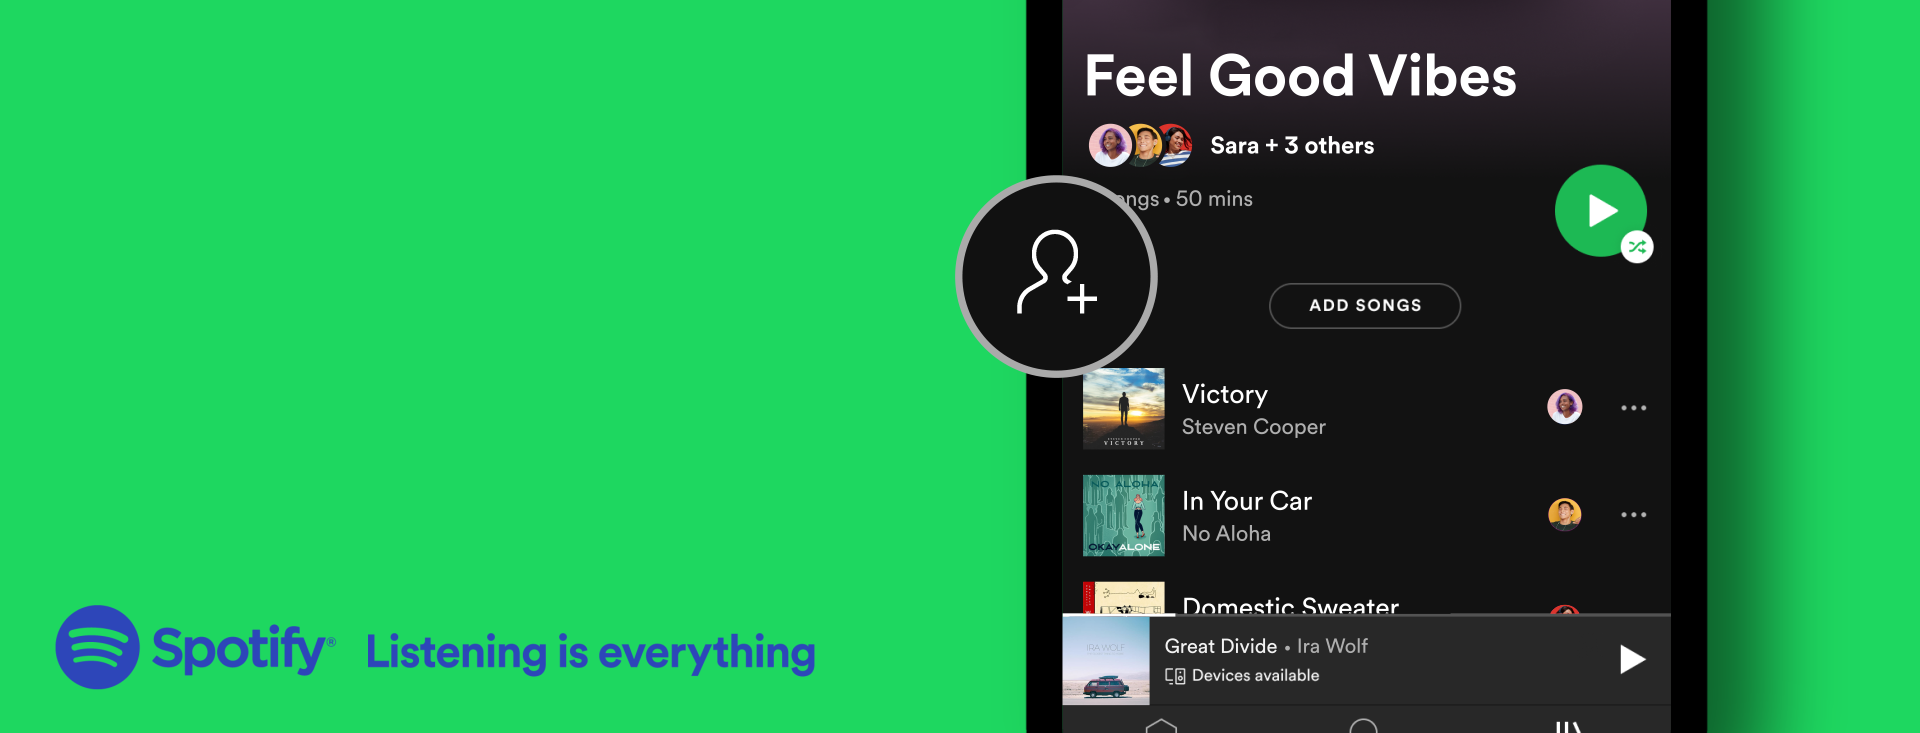 how to add a song to spotify playlist from computer